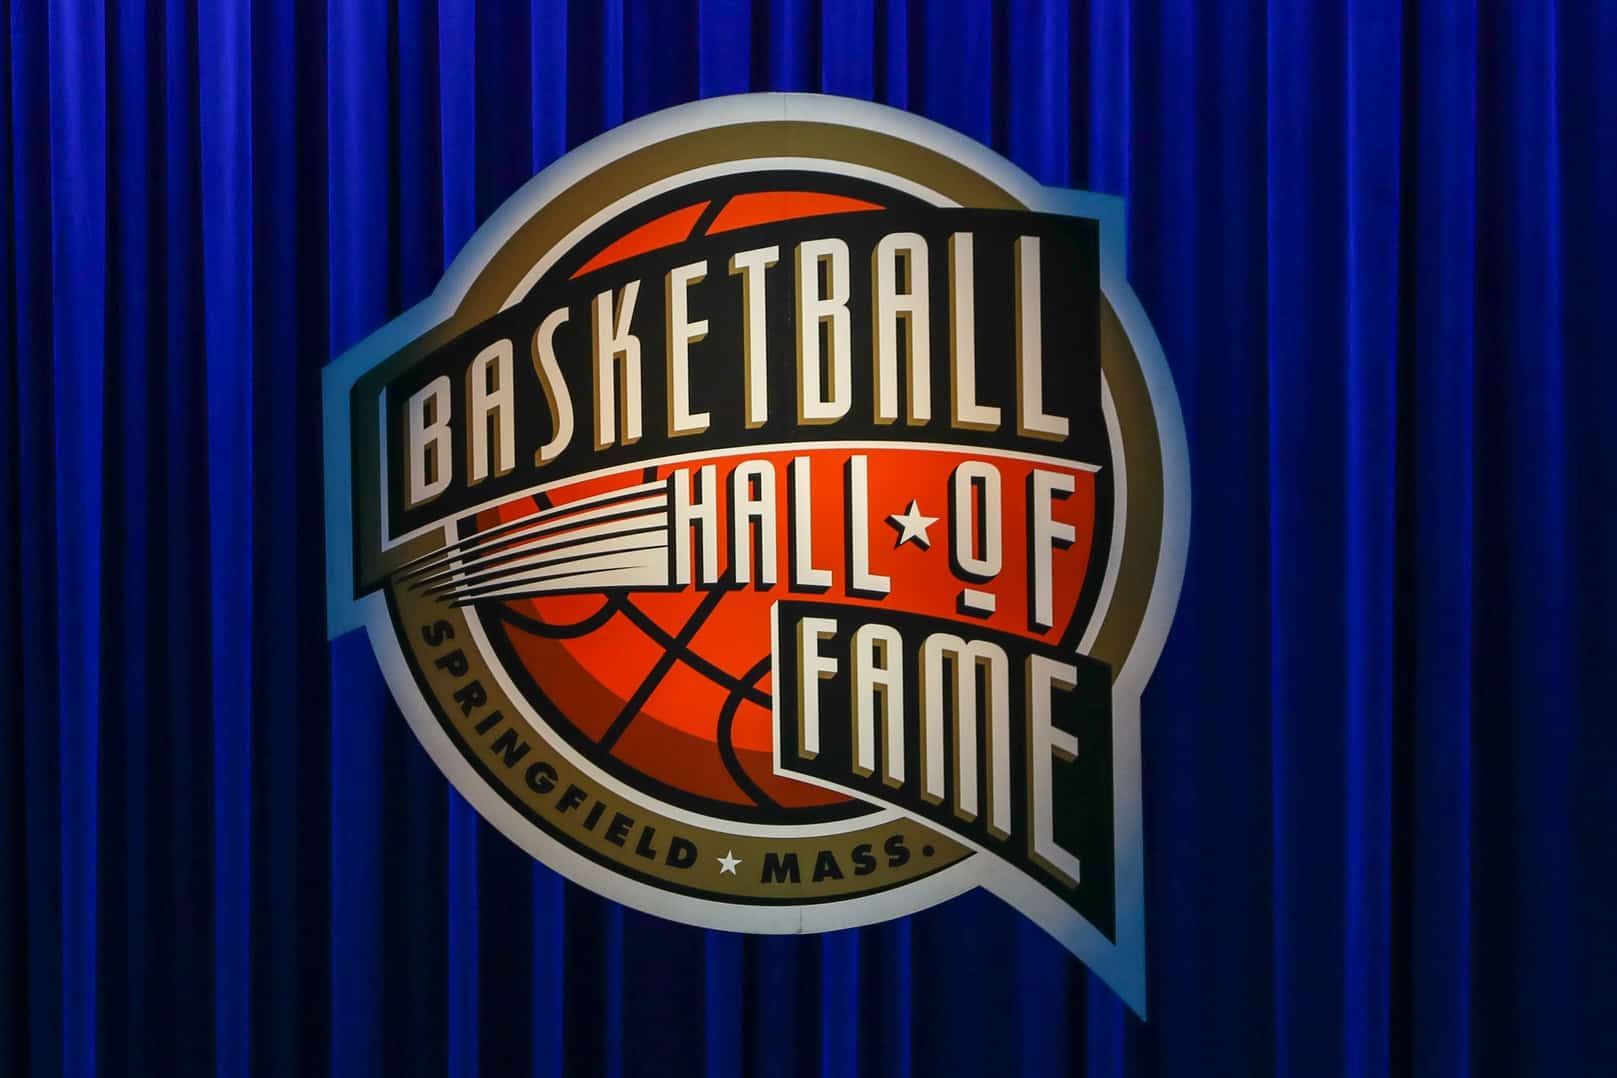 Thirteen Members Inducted Into Basketball Hall Of Fame